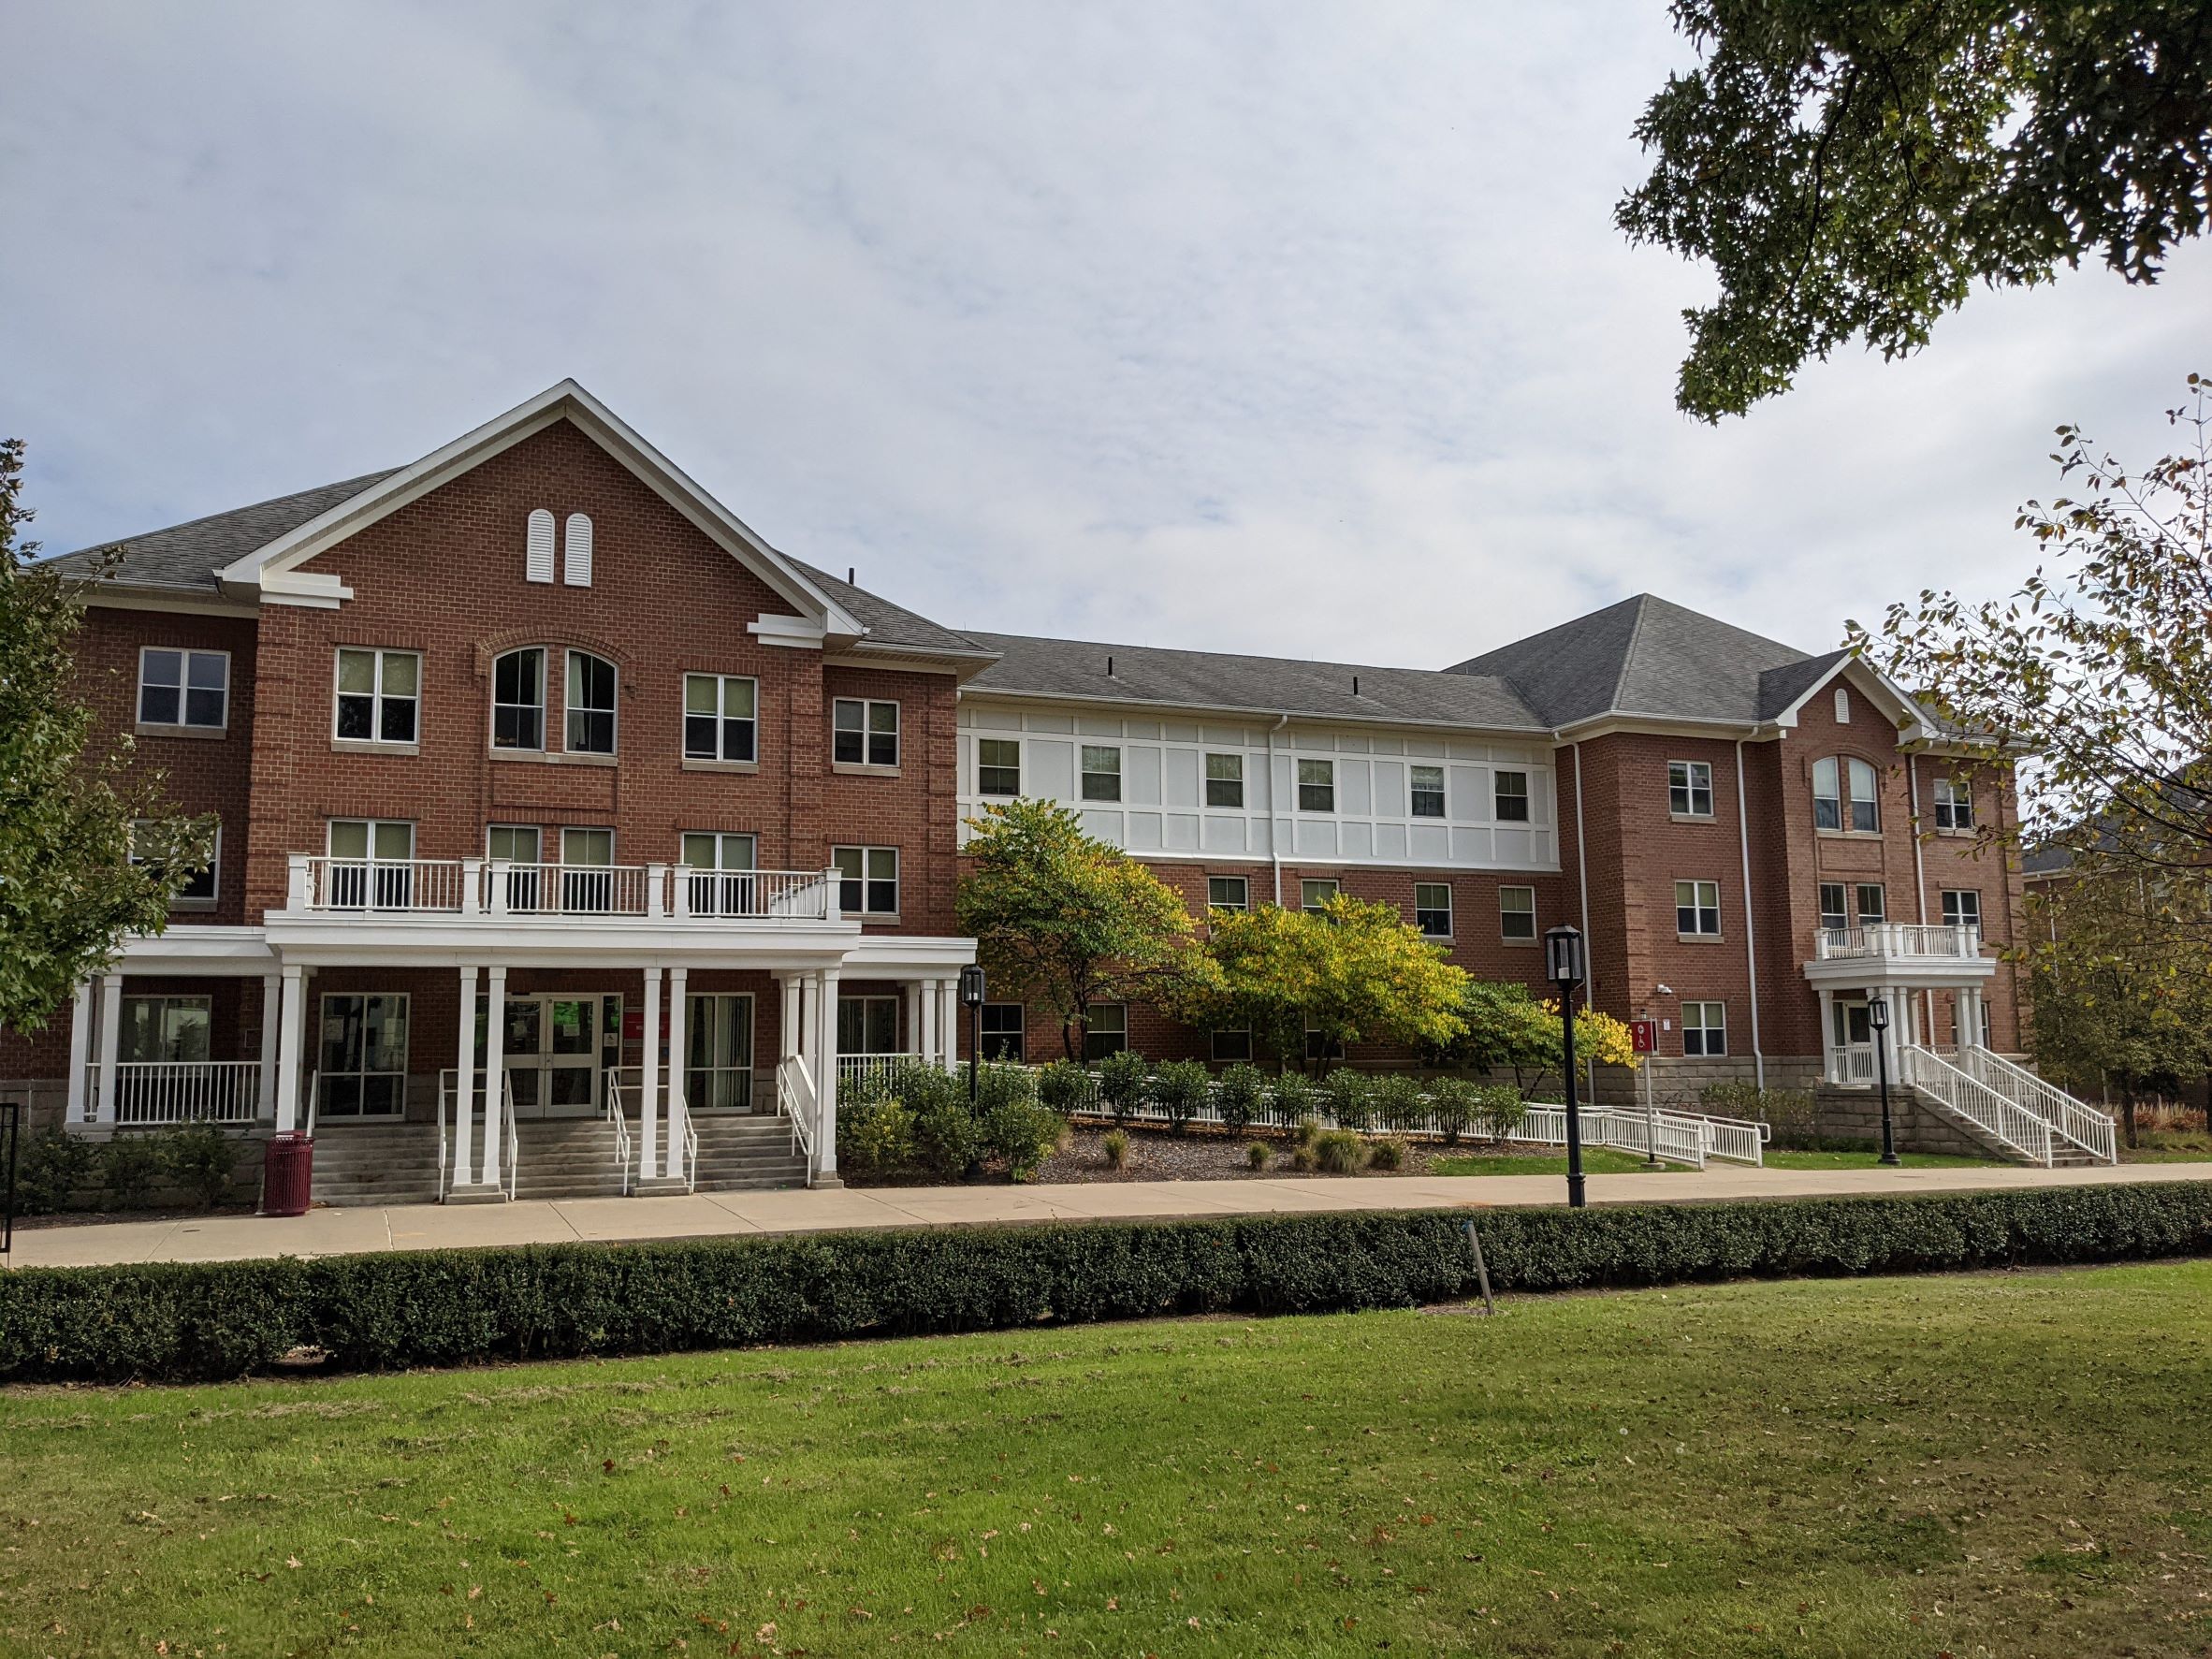 Historical looking pink brick living learning residence hall with many gabled roofs, white front porch and trim, truncated dormer windows and brick quoining, very classical looking building (designed in style of Sutton Hall, the old campus Main)